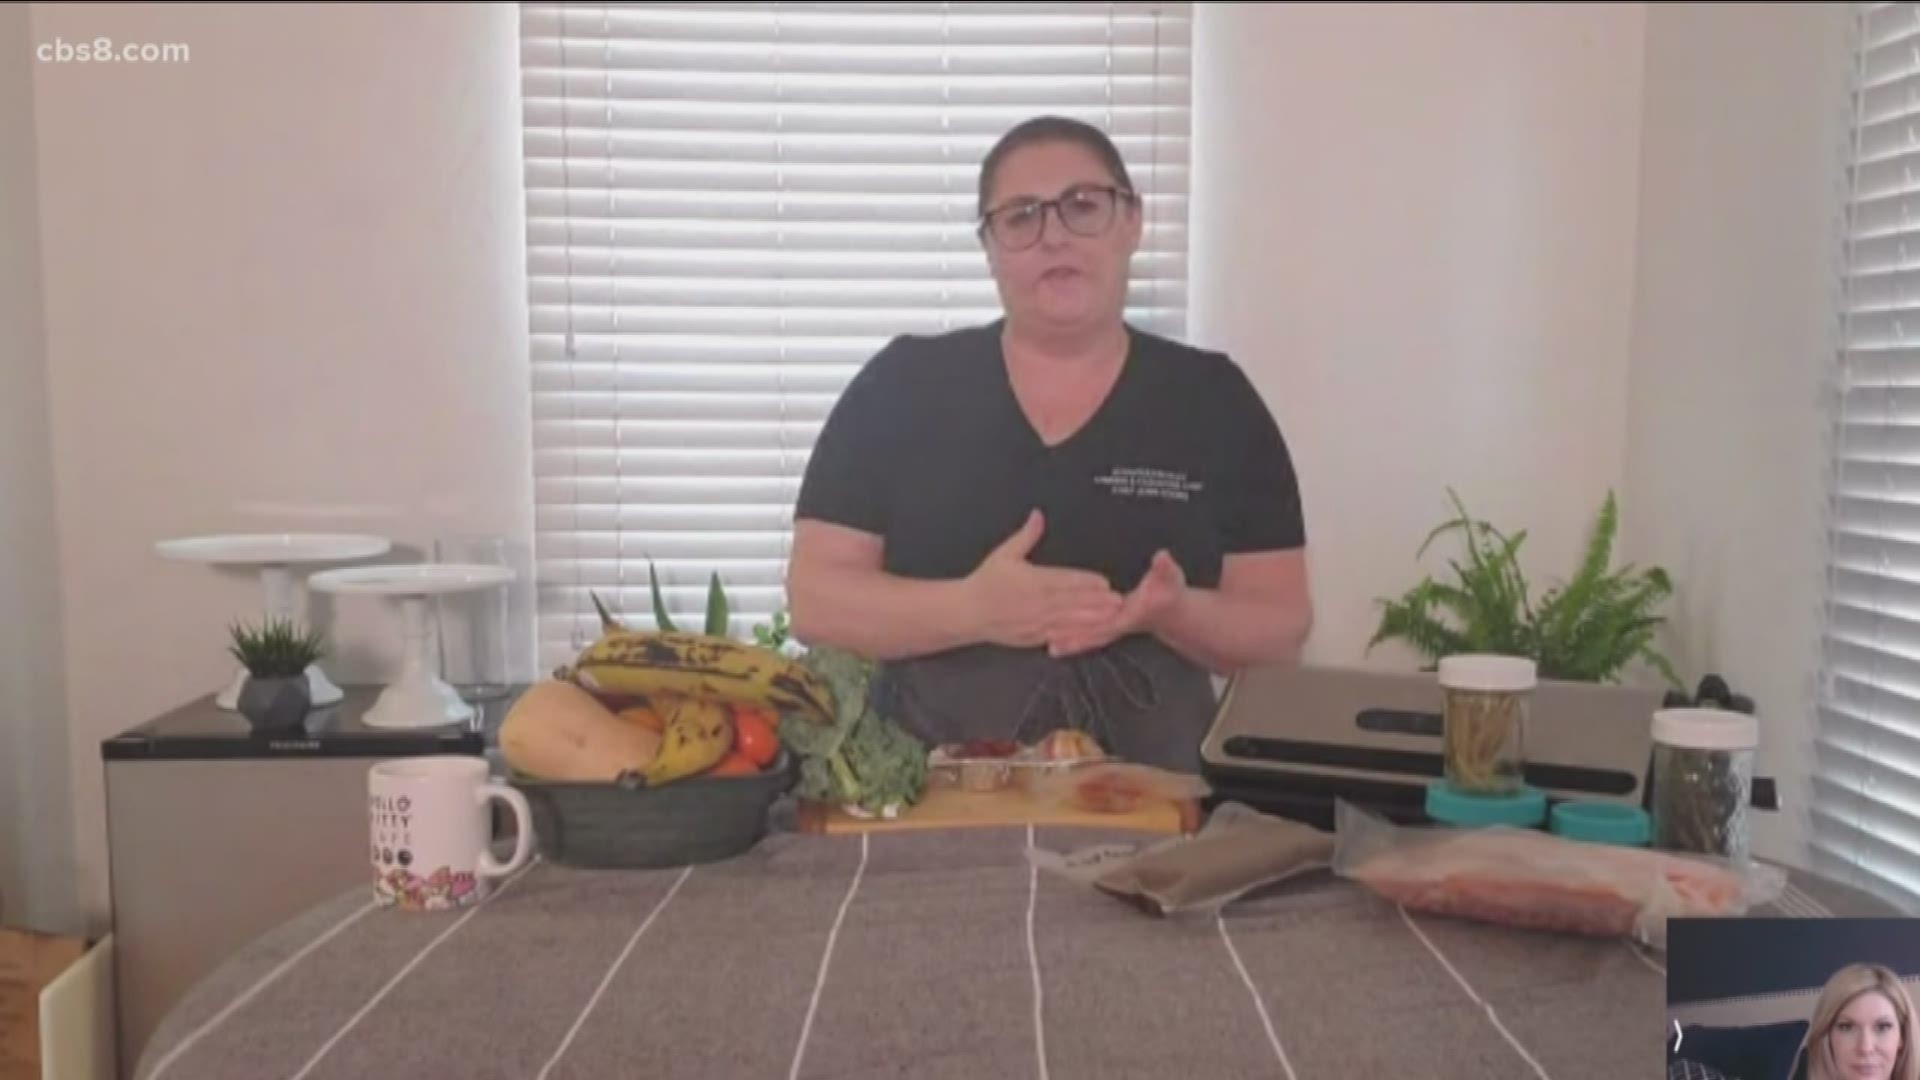 Chef Jenn Felmley gives tips for quarantined cooking. Check her out here: https://www.patreon.com/ChefJenn?fbclid=IwAR1lMpz0313-xeQNXAYeDEzxQjUUUpooMvttEdD543p37xrlX